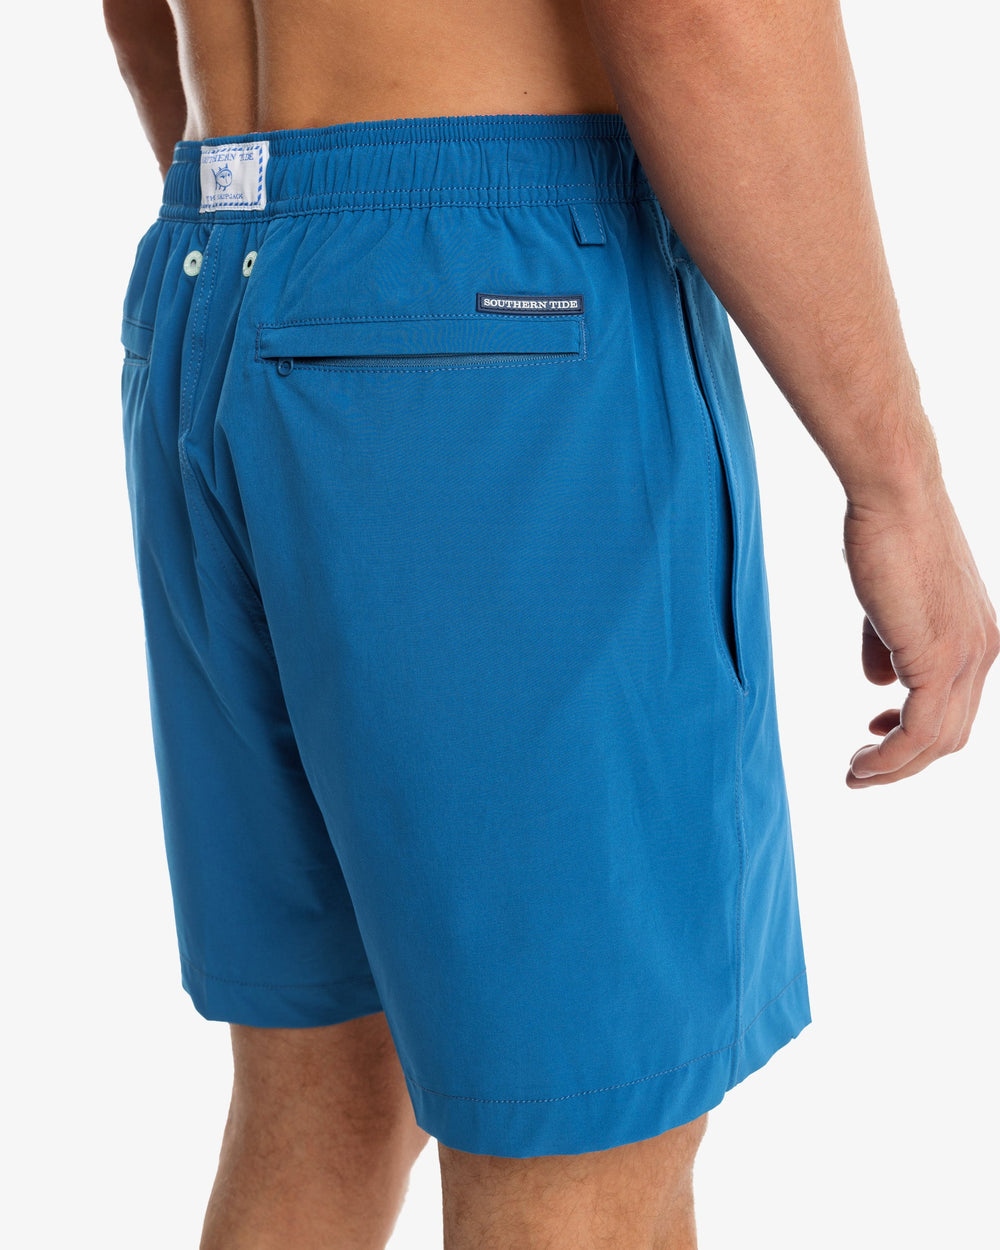 The model detail view of the Men's Solid Swim Trunk by Southern Tide - Blue Sapphire